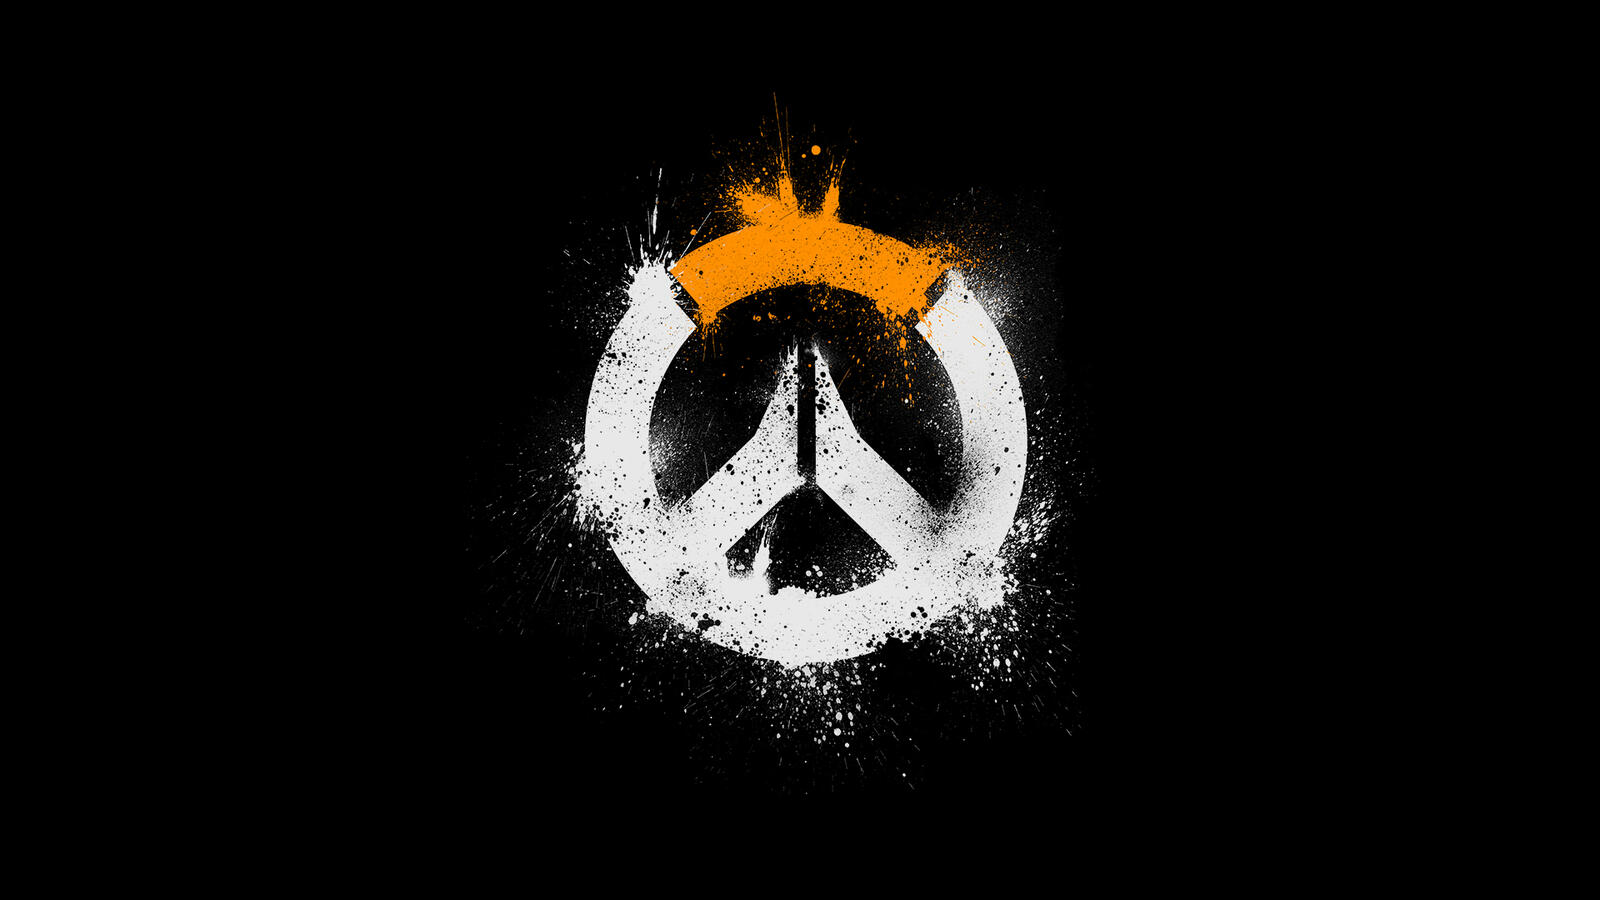 Free photo The white and orange Overwatch logo on a black background